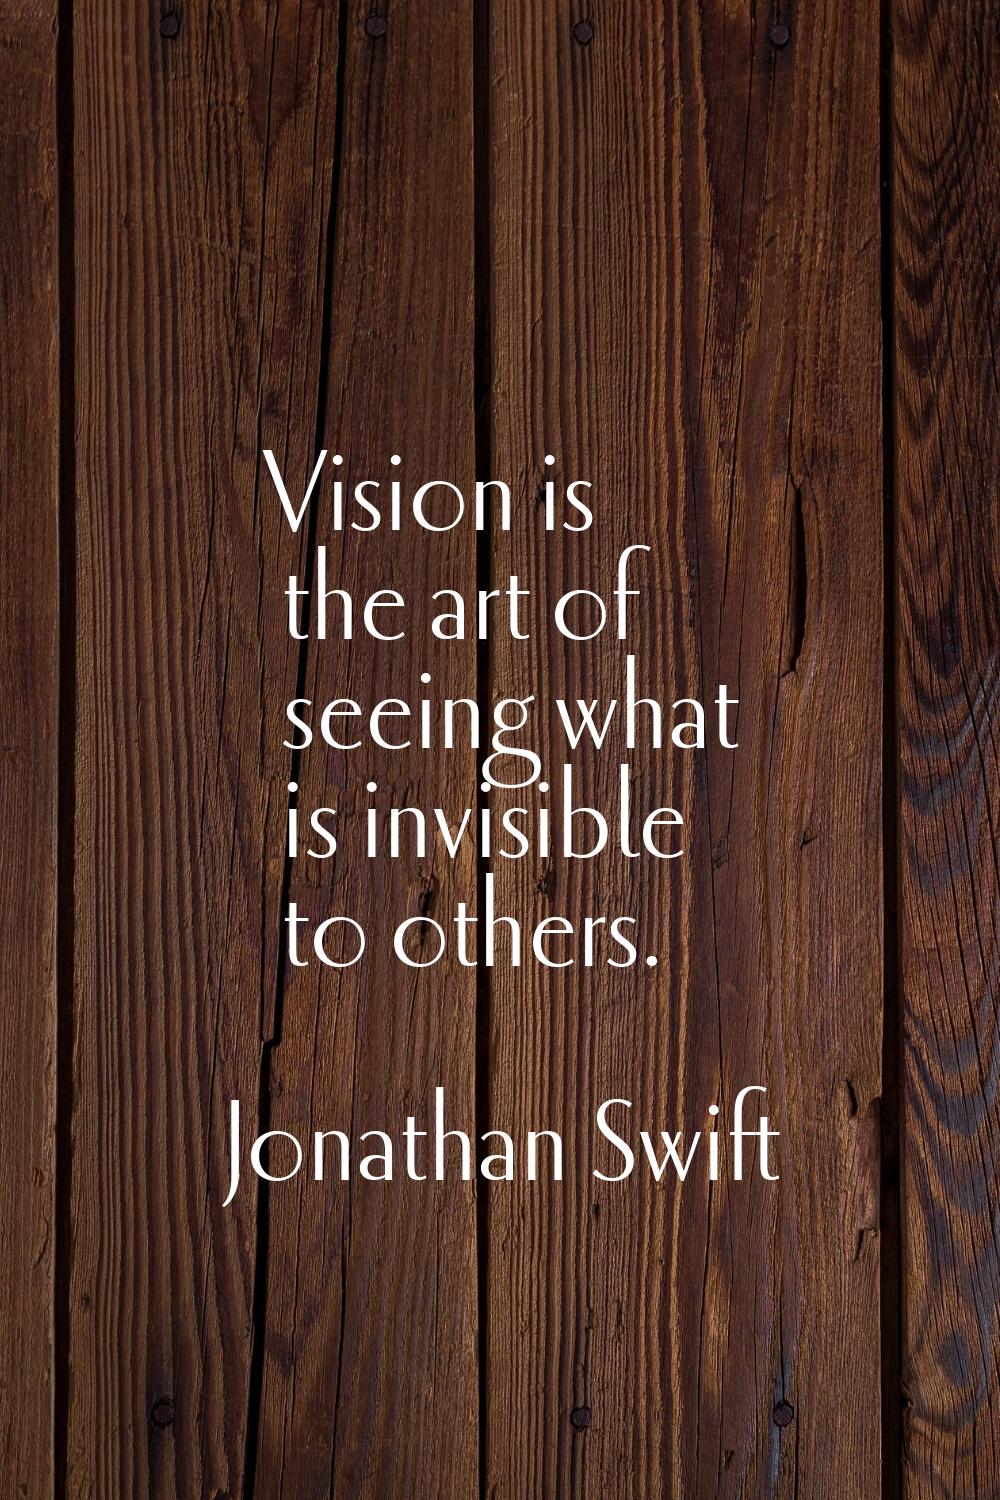 Vision is the art of seeing what is invisible to others.